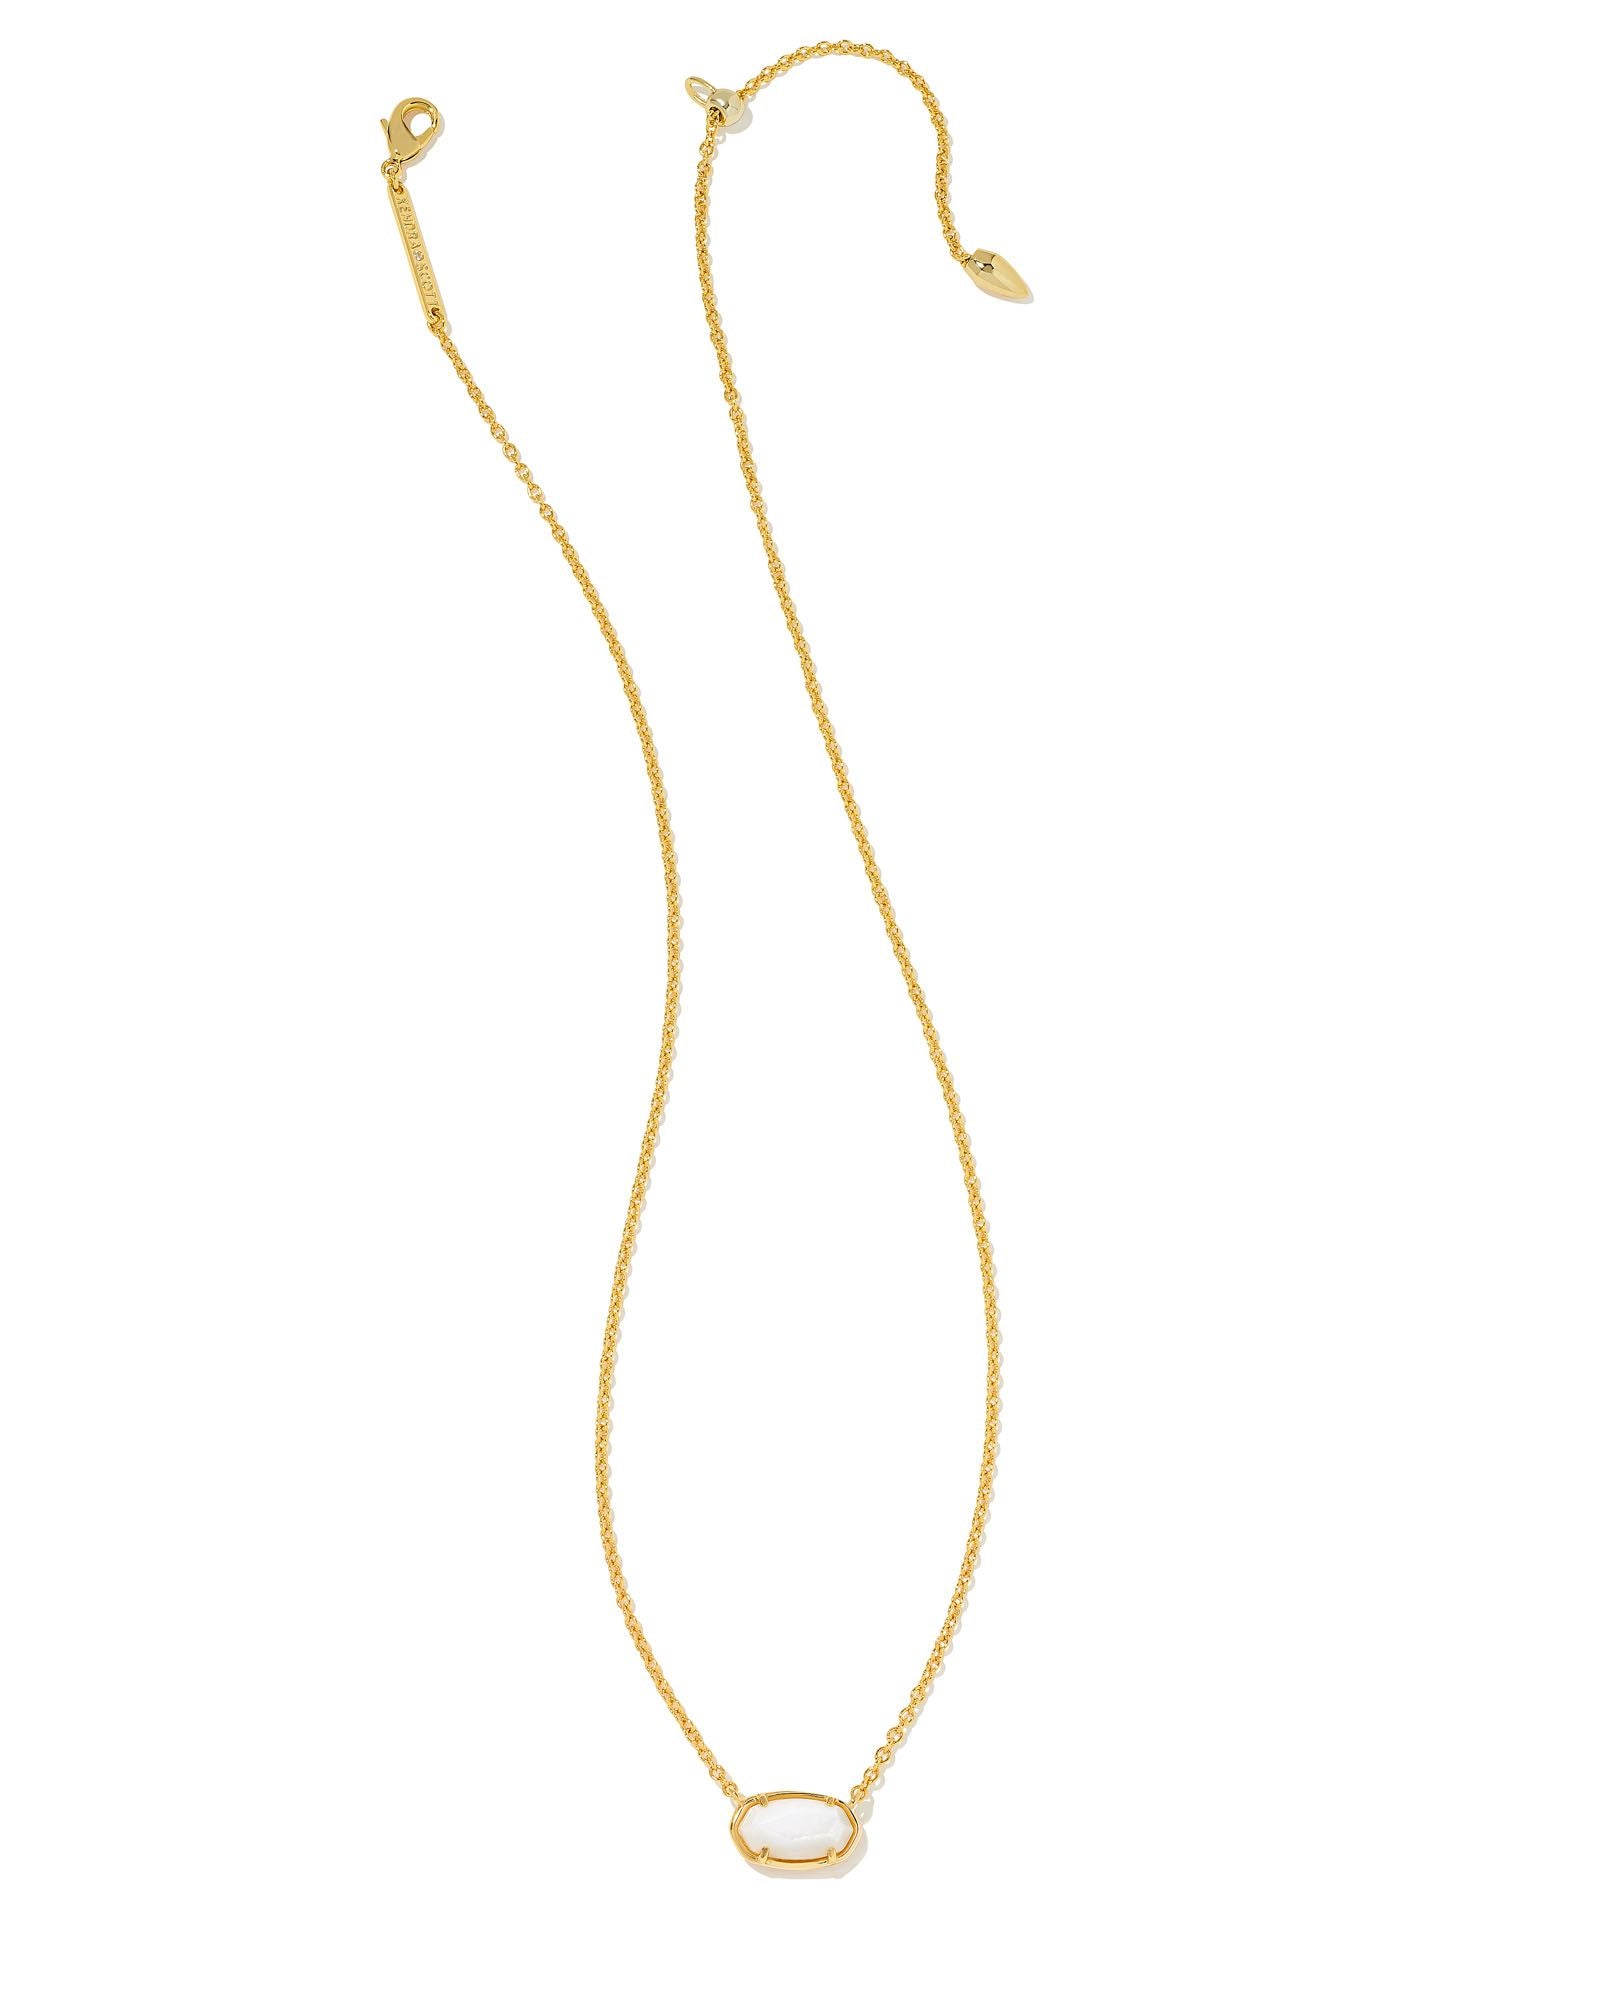 Grayson Short Pendant Necklace White MOP in Gold or Silver